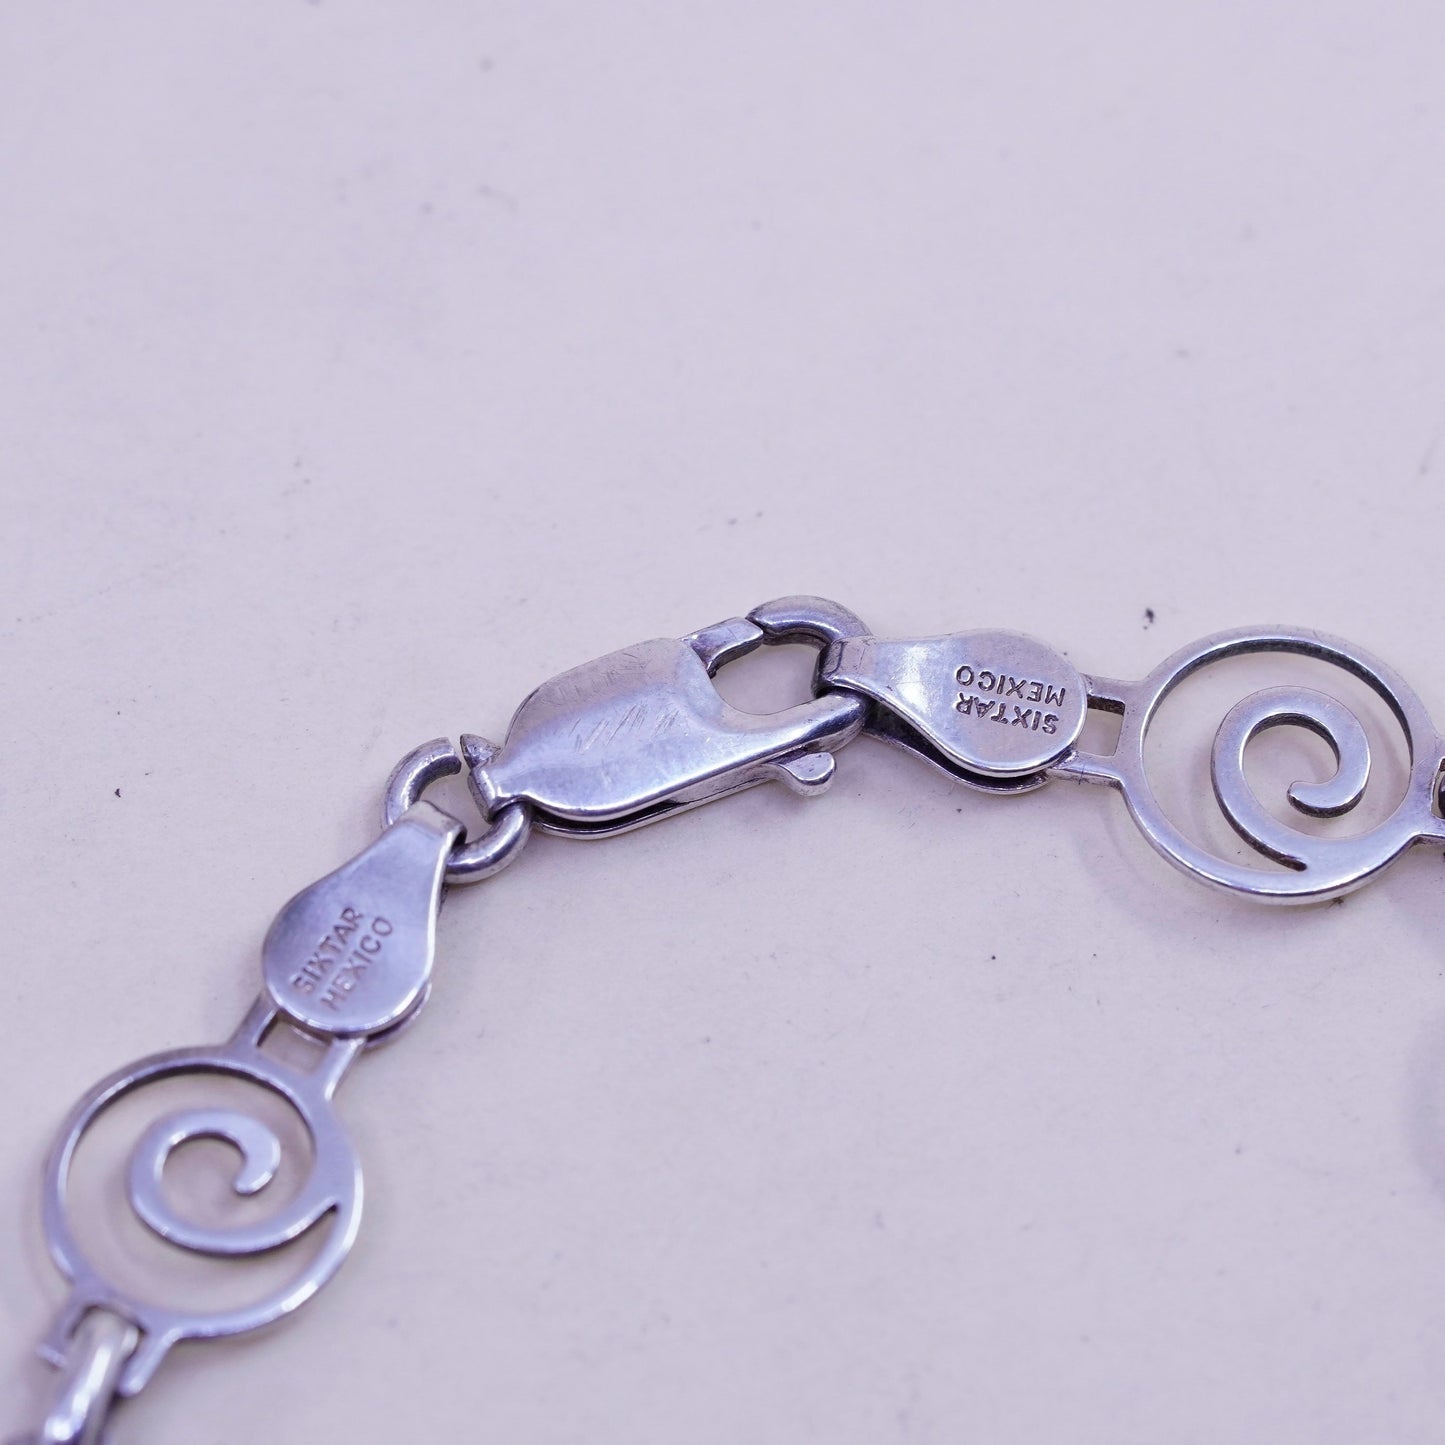 6.75”, Vintage Mexico sterling silver charm bracelet, 925 swirly link chain